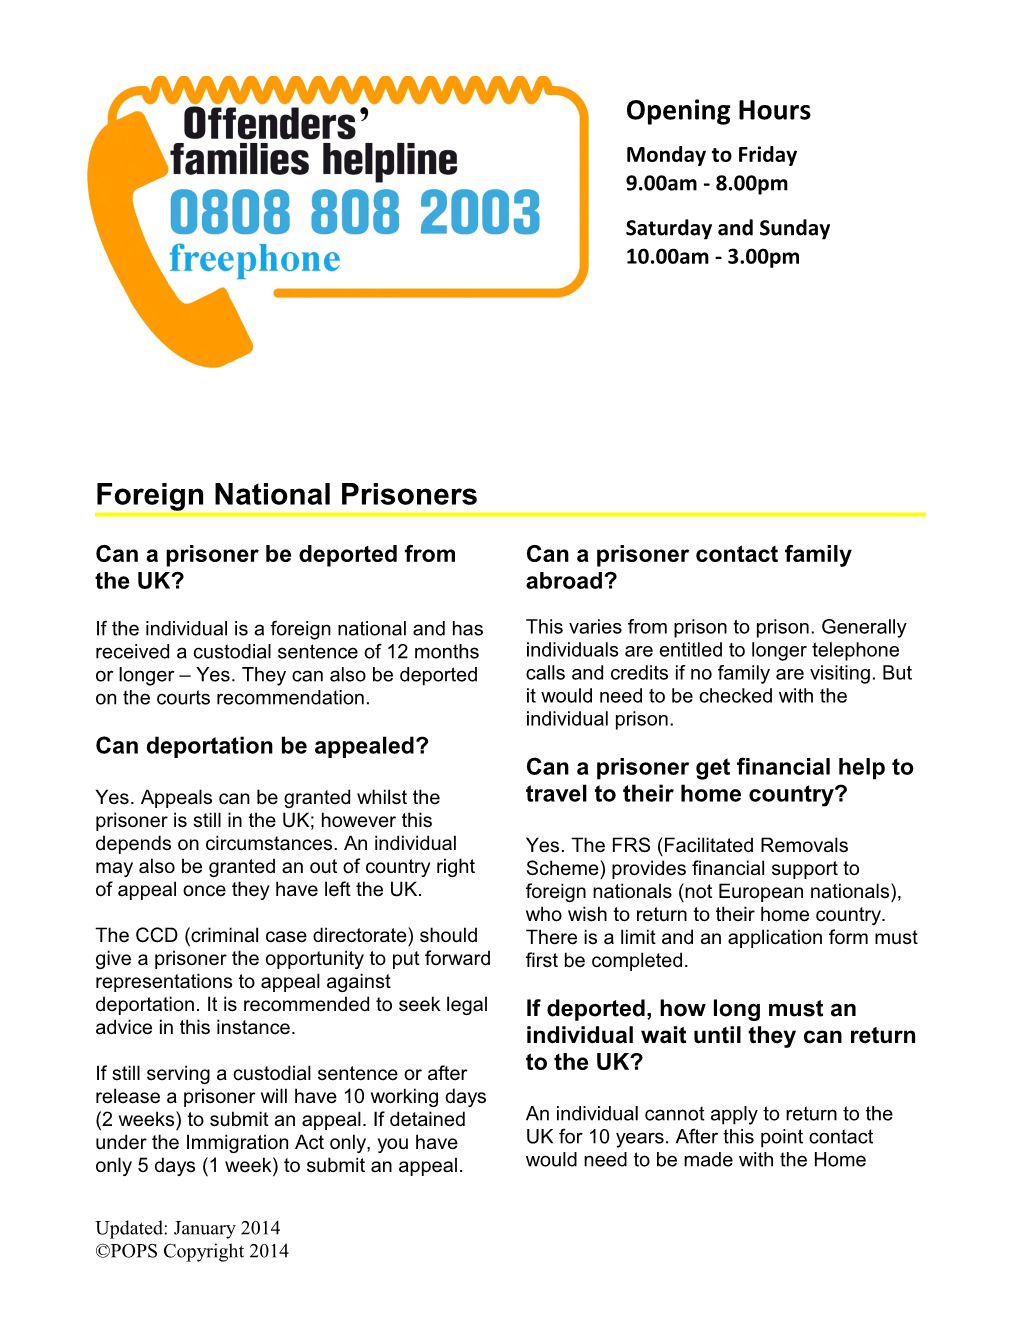 Can a Prisoner Be Deported from the UK?